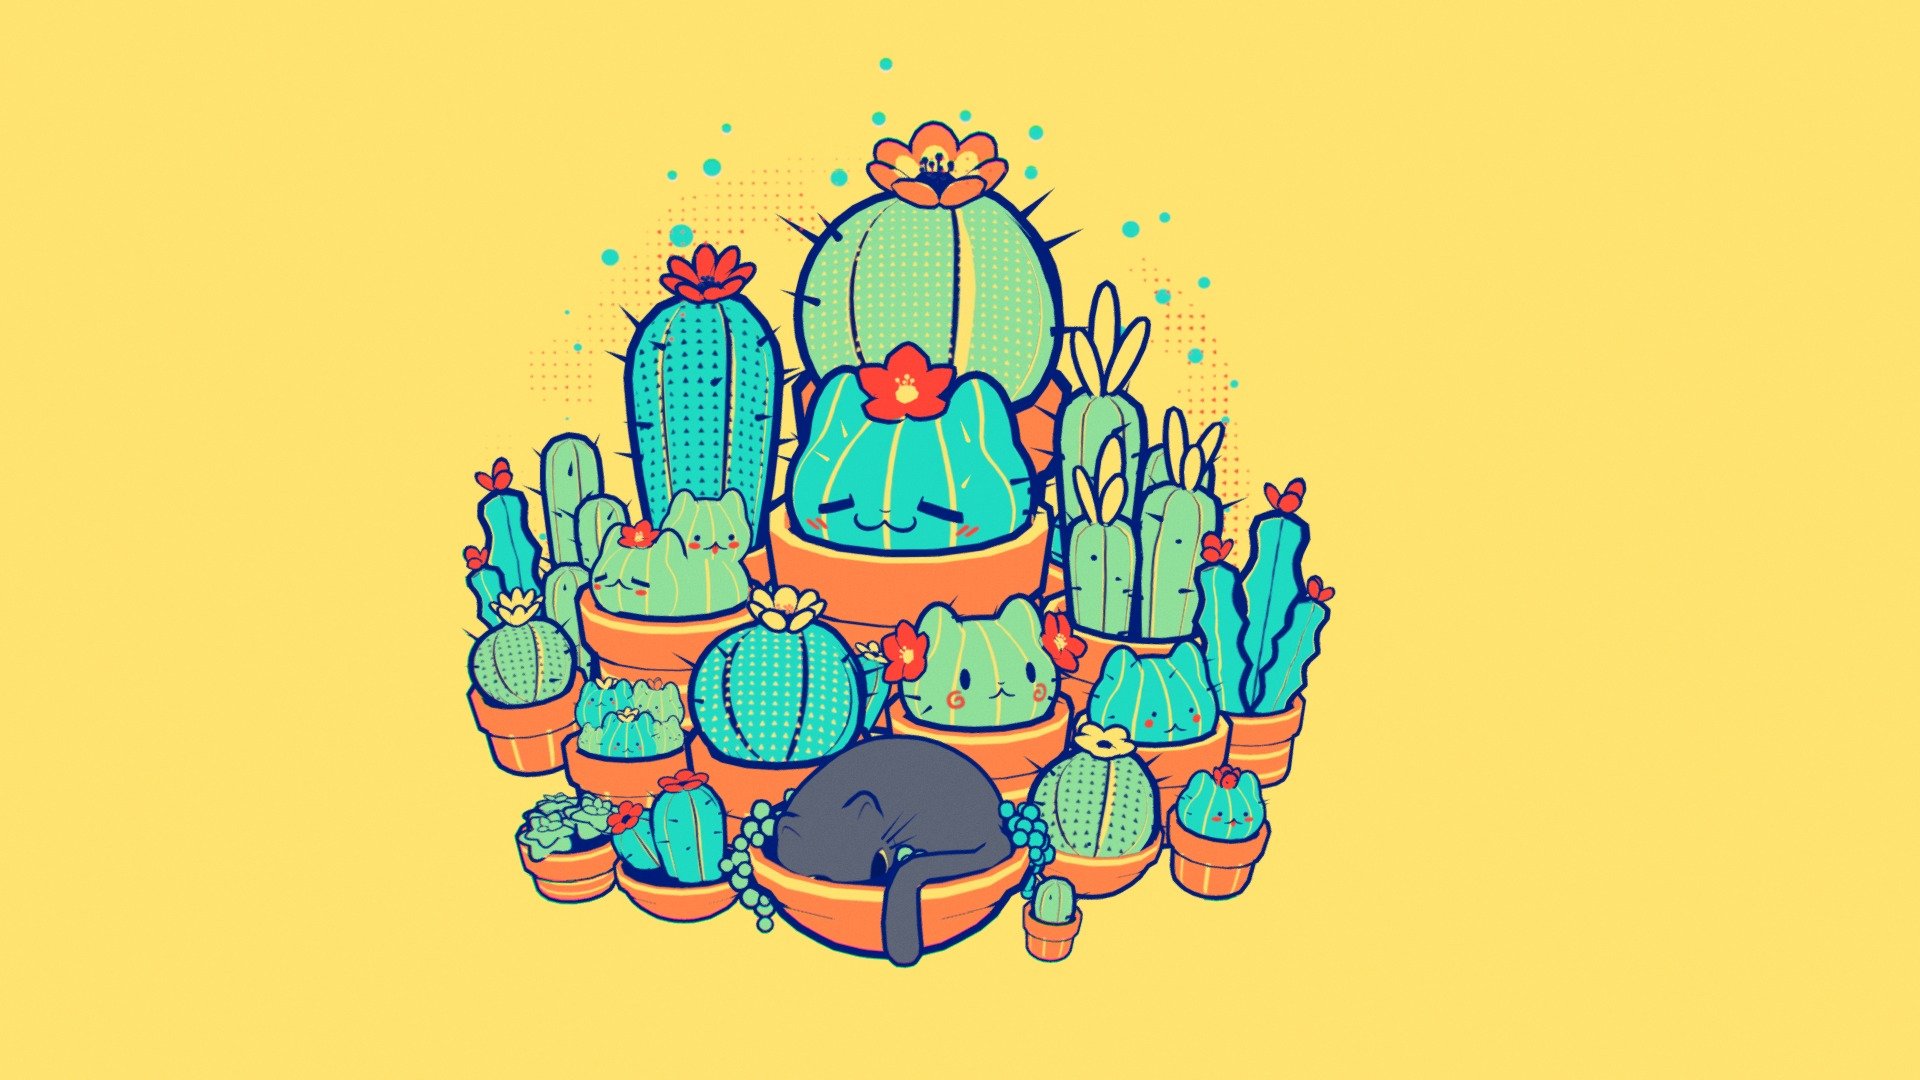 It's a cactus made in the shape of cats, so it's a &ldquo;cat